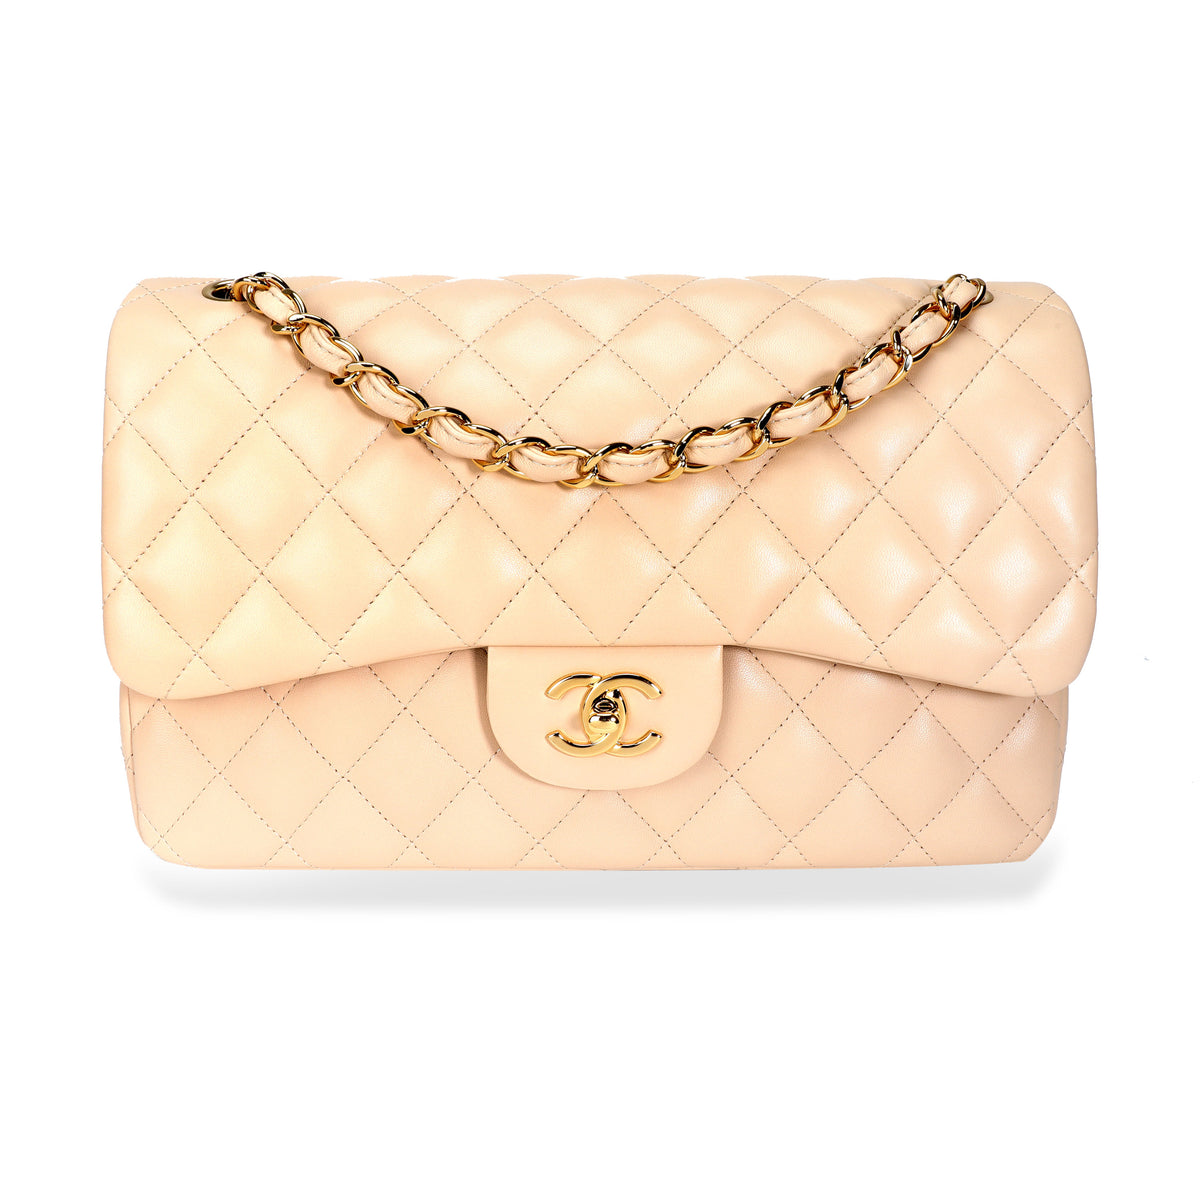 Chanel Light Beige Lambskin Quilted Classic Jumbo Double Flap Bag